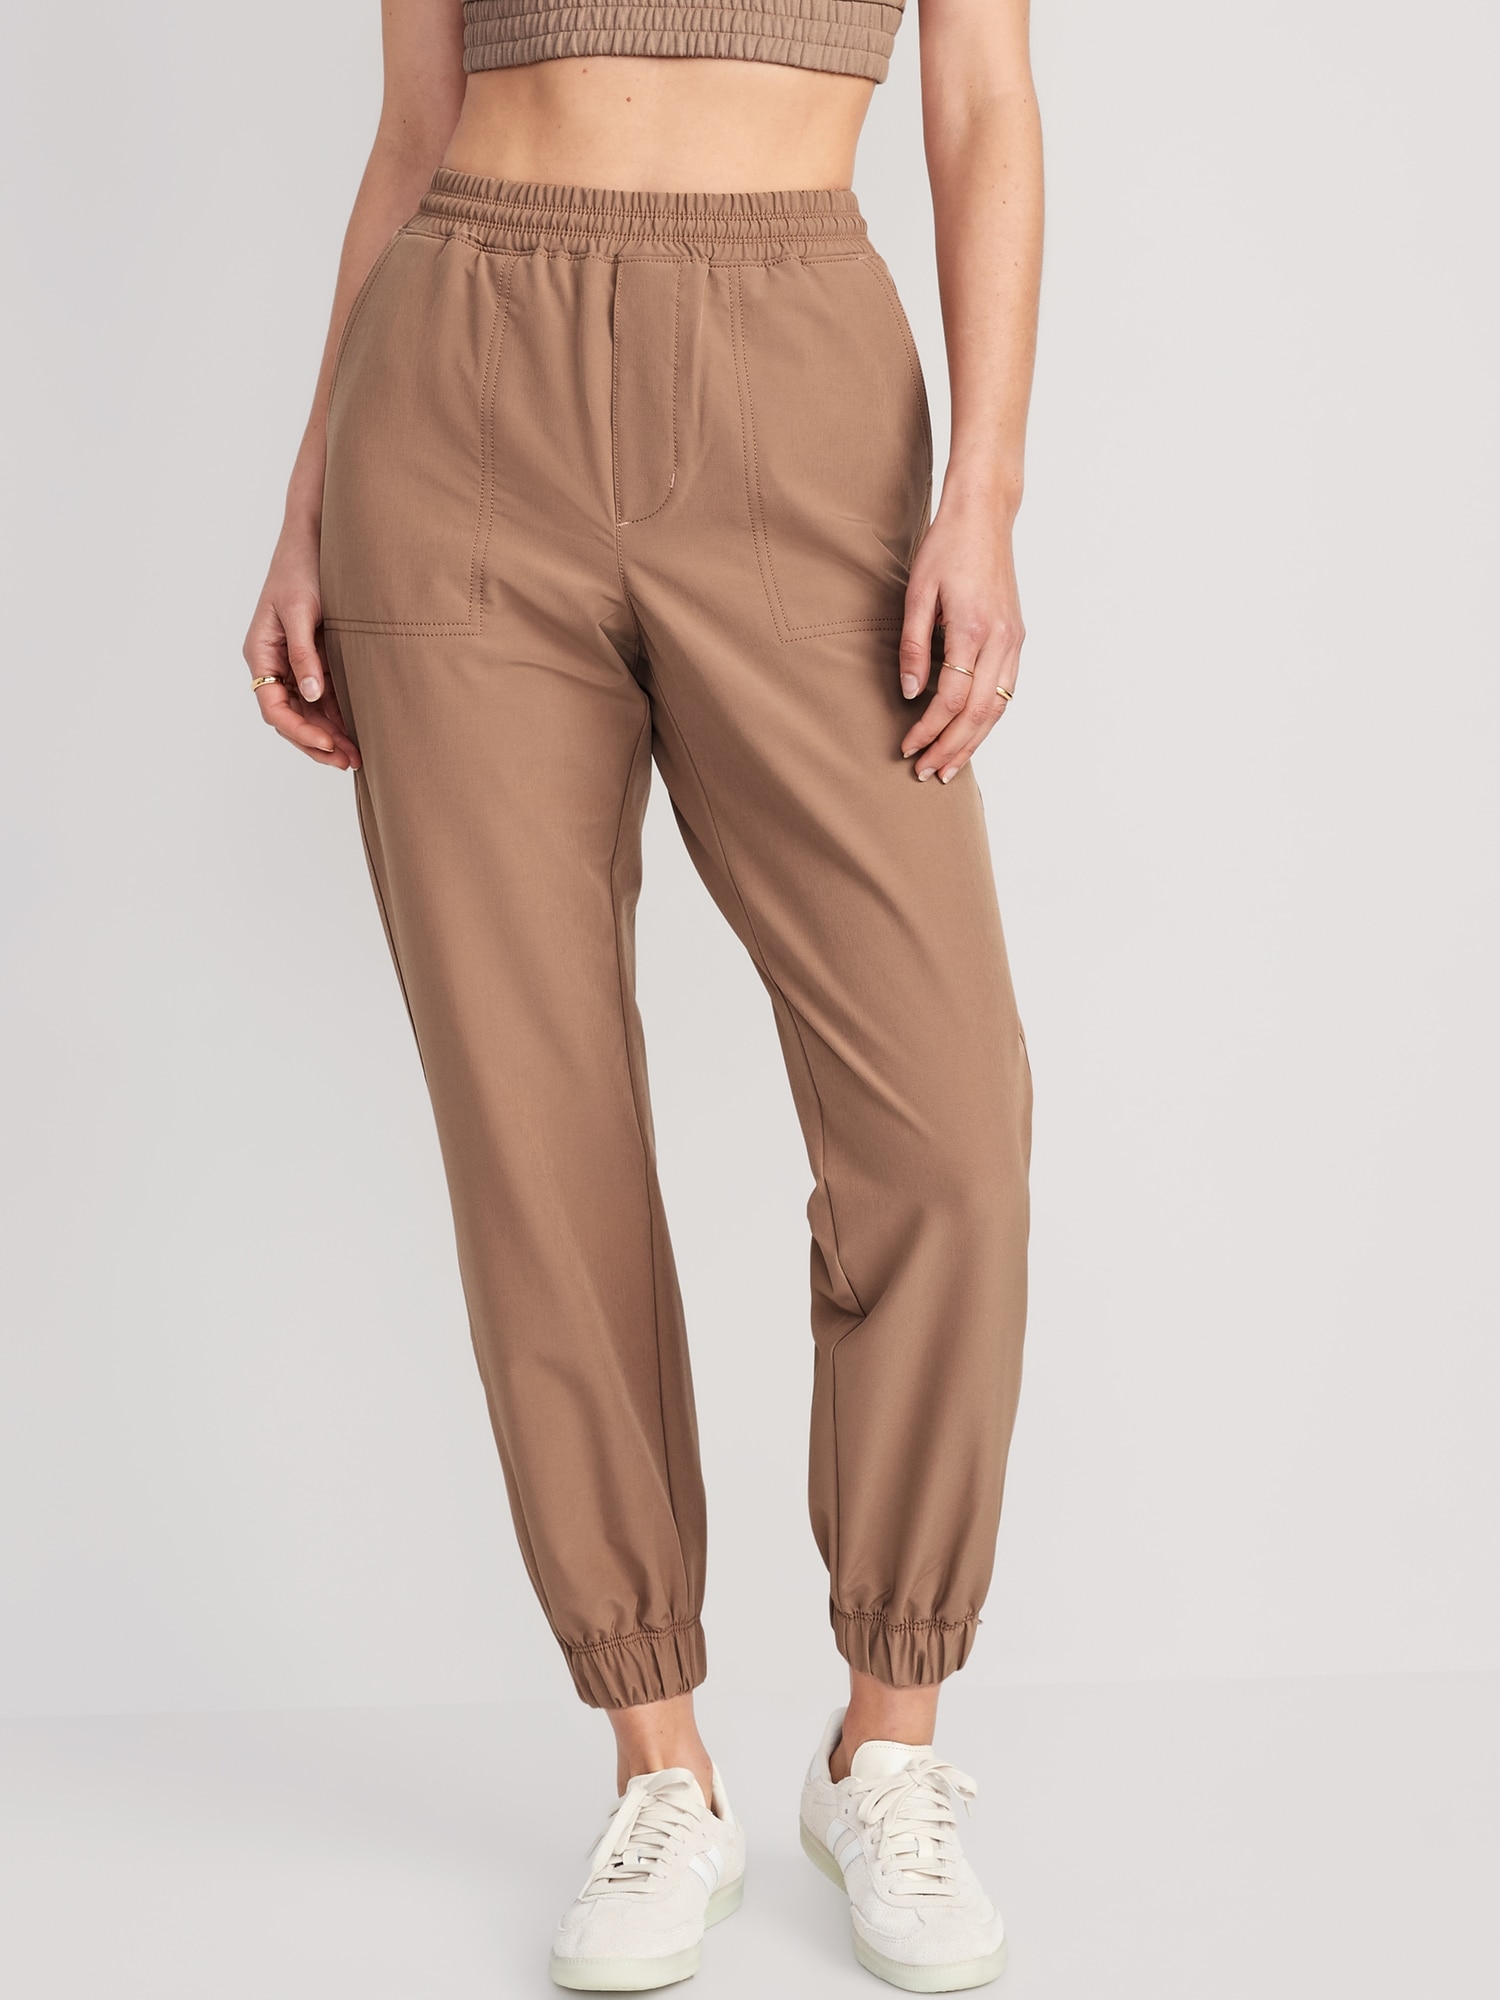 Old Navy High-Waisted All-Seasons StretchTech Water-Repellent Jogger Pants  for Women